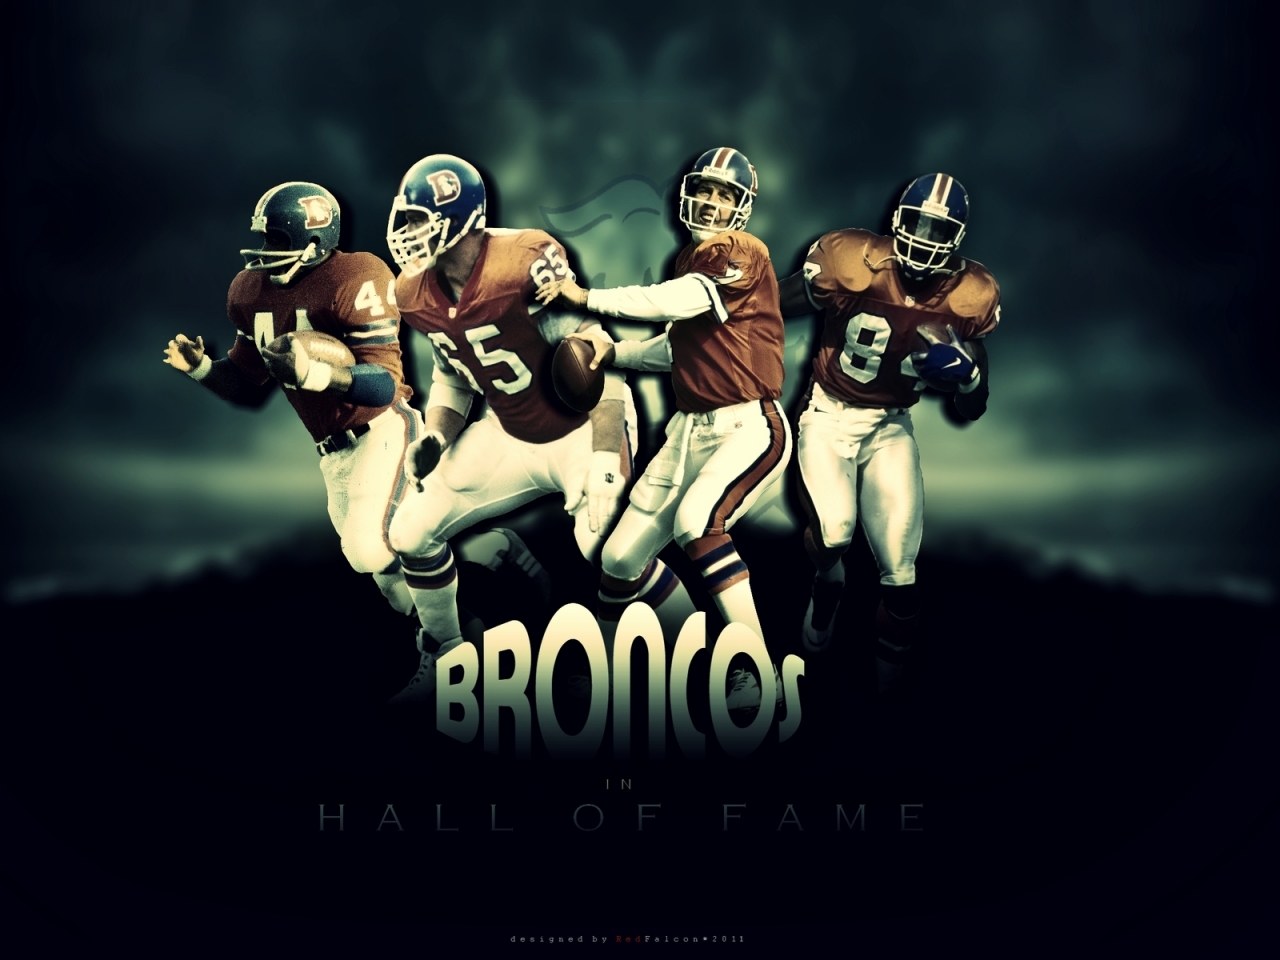 Broncos Hall of Fame for 1280 x 960 resolution